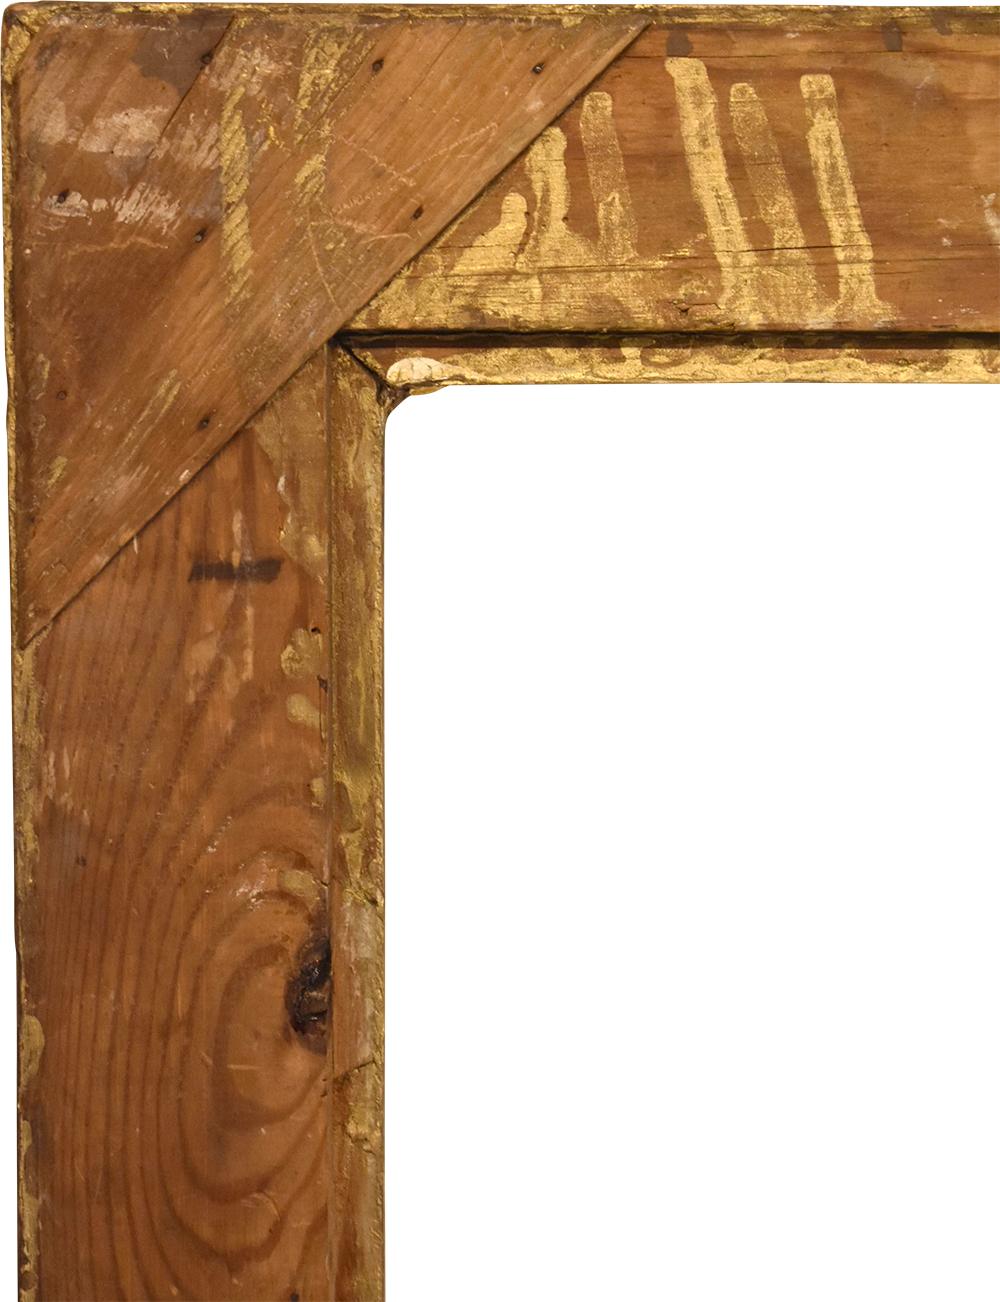 American Gilt Picture Frame for canvas art in Louis XV Style, circa 1890. Restored and with both original and restored surface. A versatile frame that can be used on a variety of works of art.

Rabbet Dimensions: 25.5